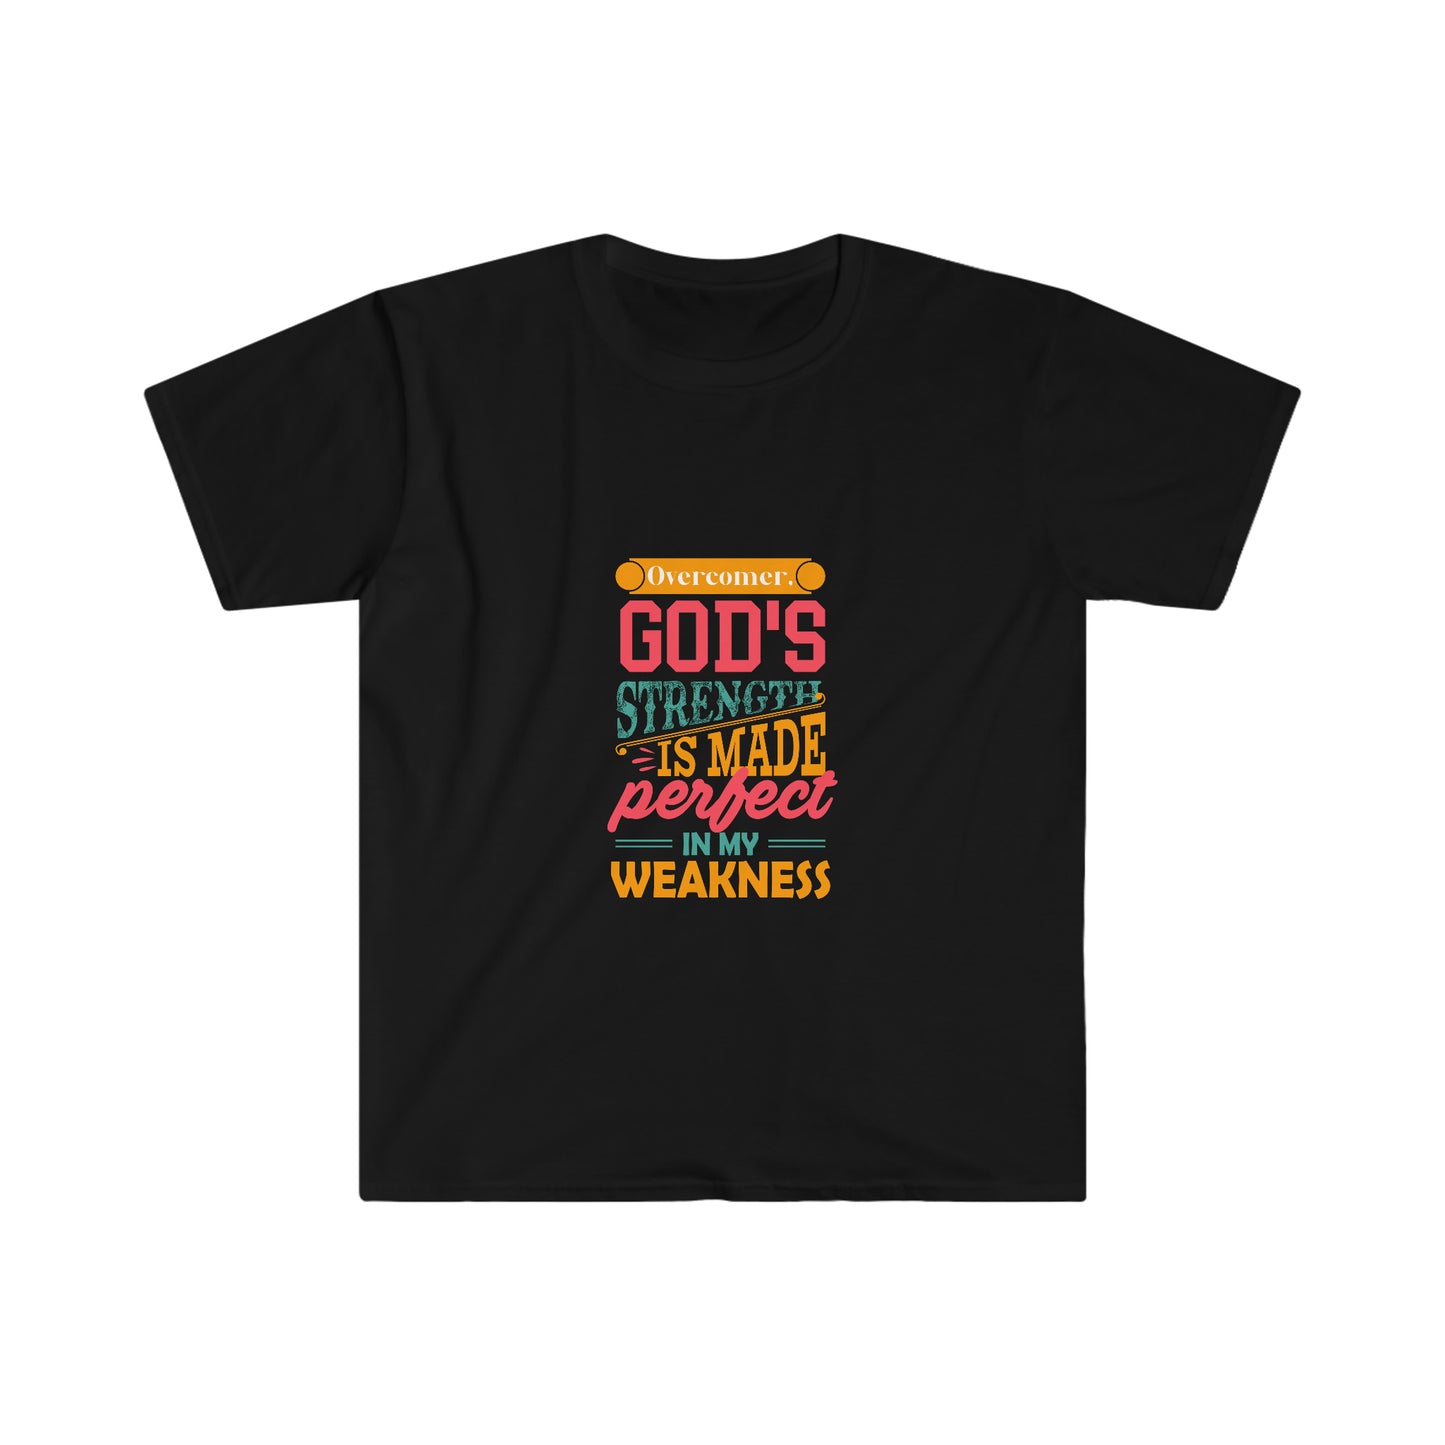 Overcomer, God's Strength Is Made Perfect In My Weakness Unisex T-shirt